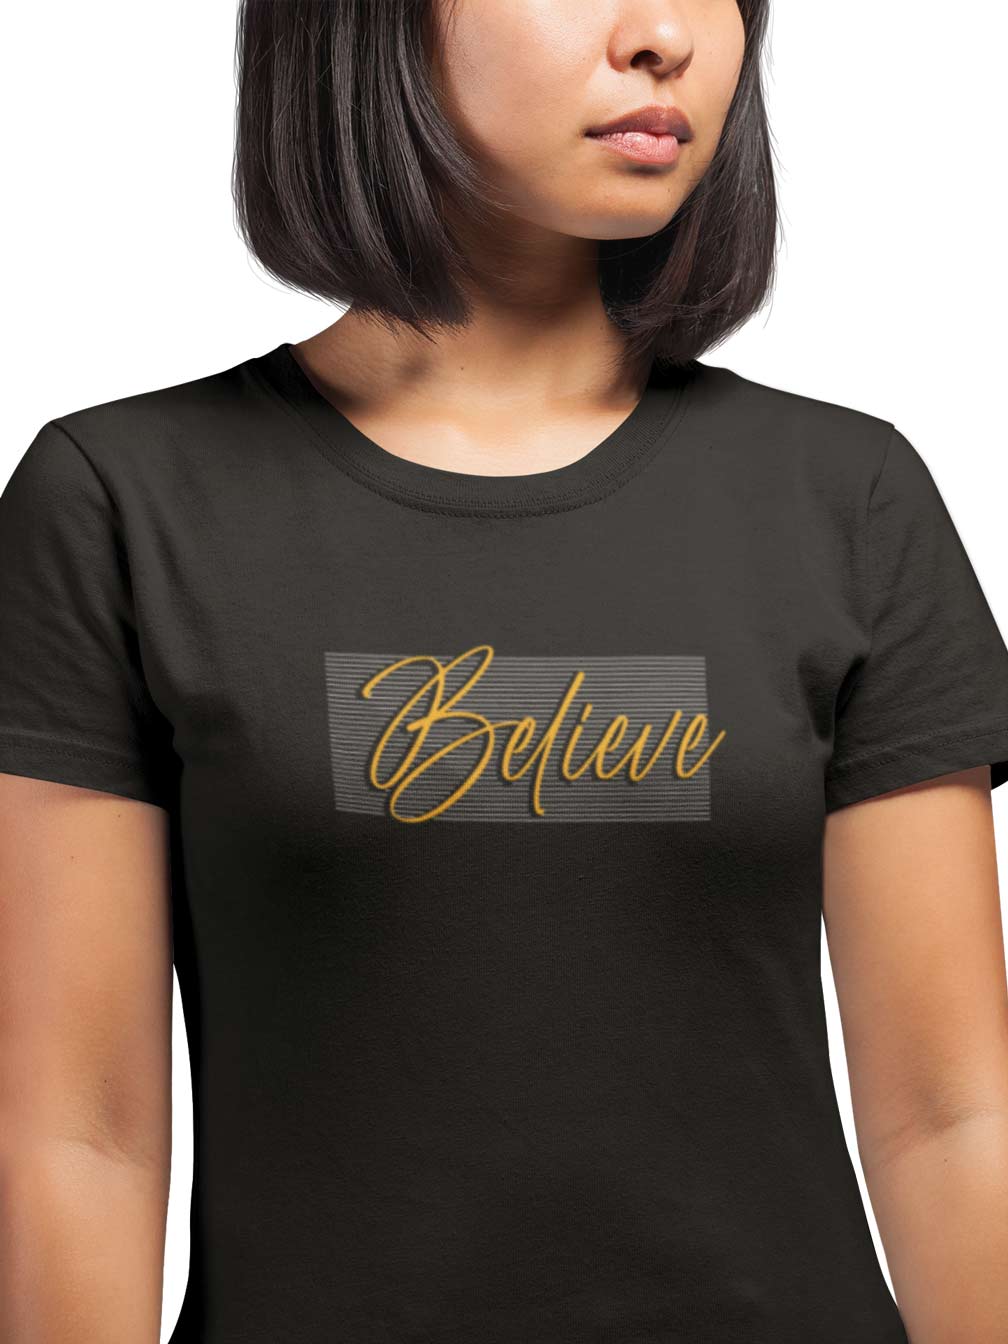 Medlle Trendy THE BELIEVE Women T-shirt | Chic & Cool Cotton Tee - Medlle